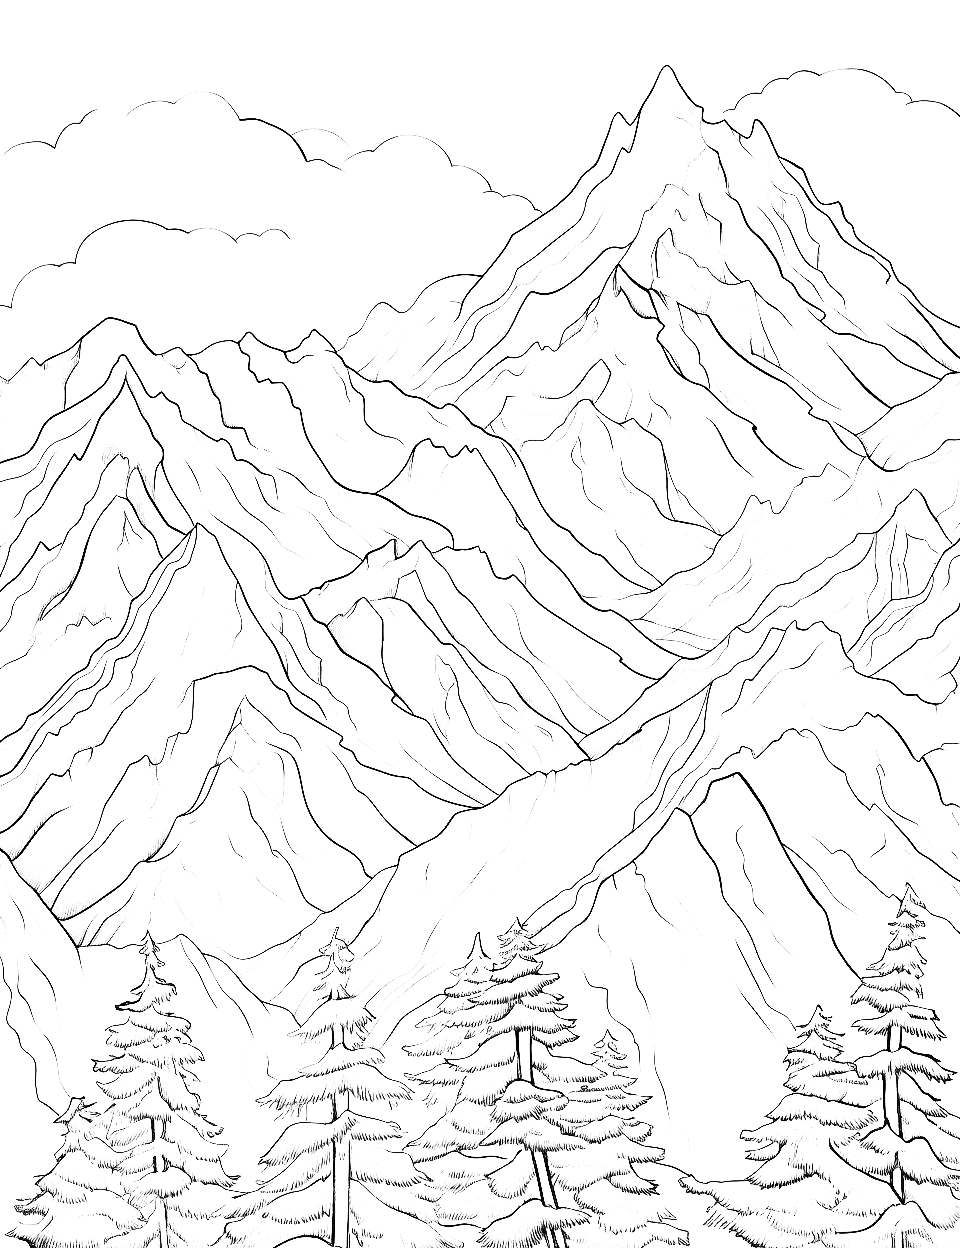 Inspiring Mountain Peaks Adult Coloring Page - Majestic mountain peaks touching the sky.